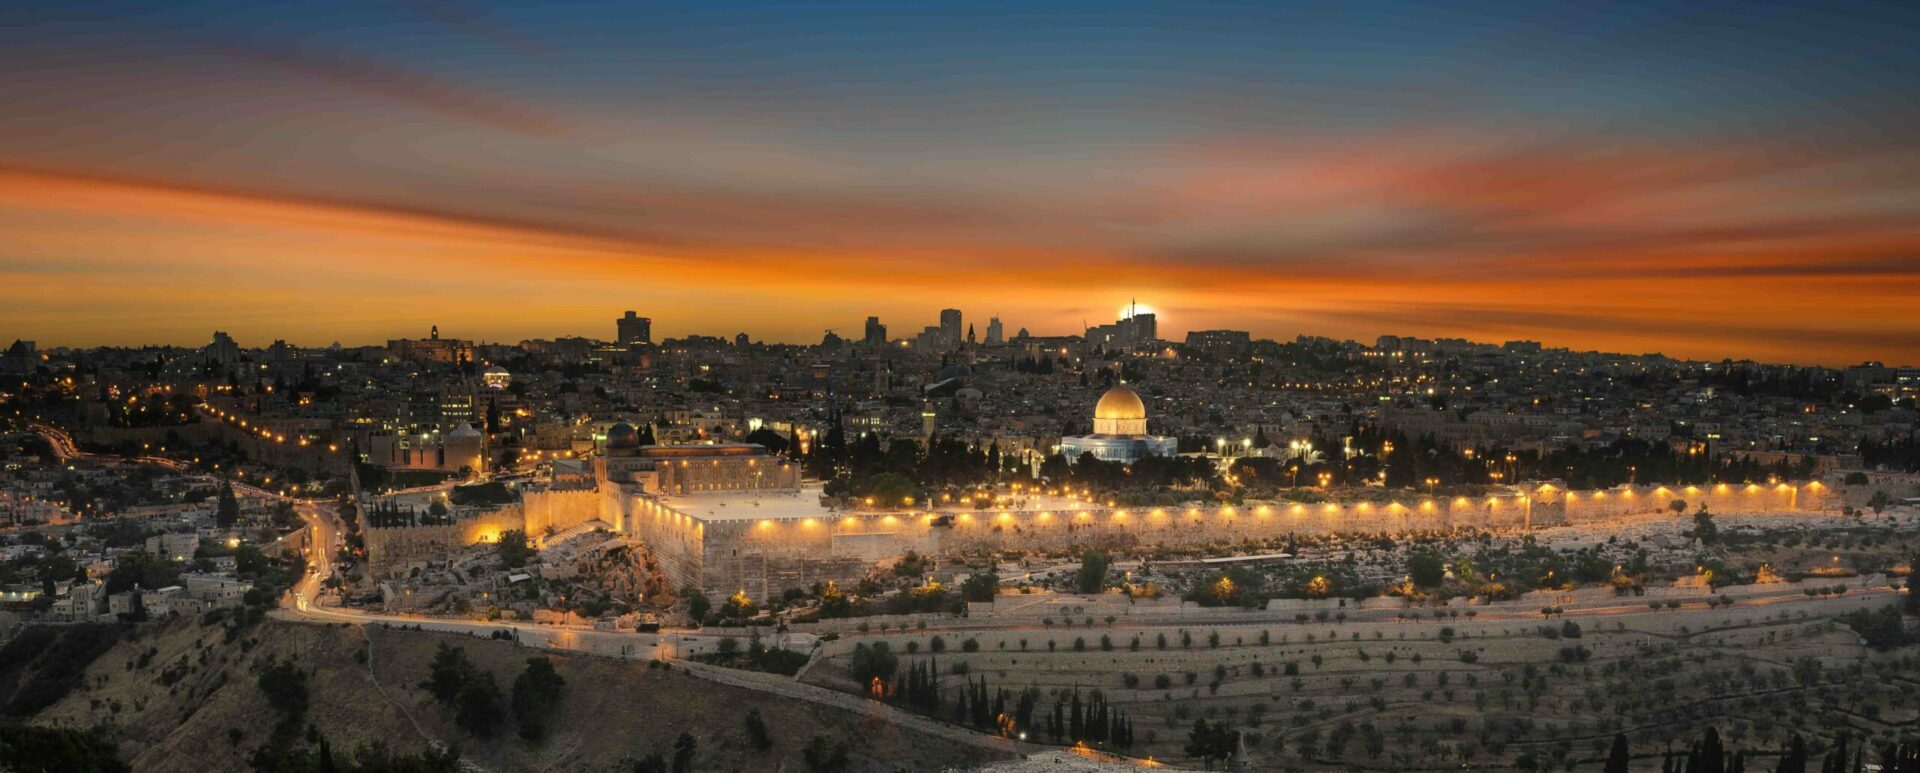 Our insiders guide to Jerusalem in Israel